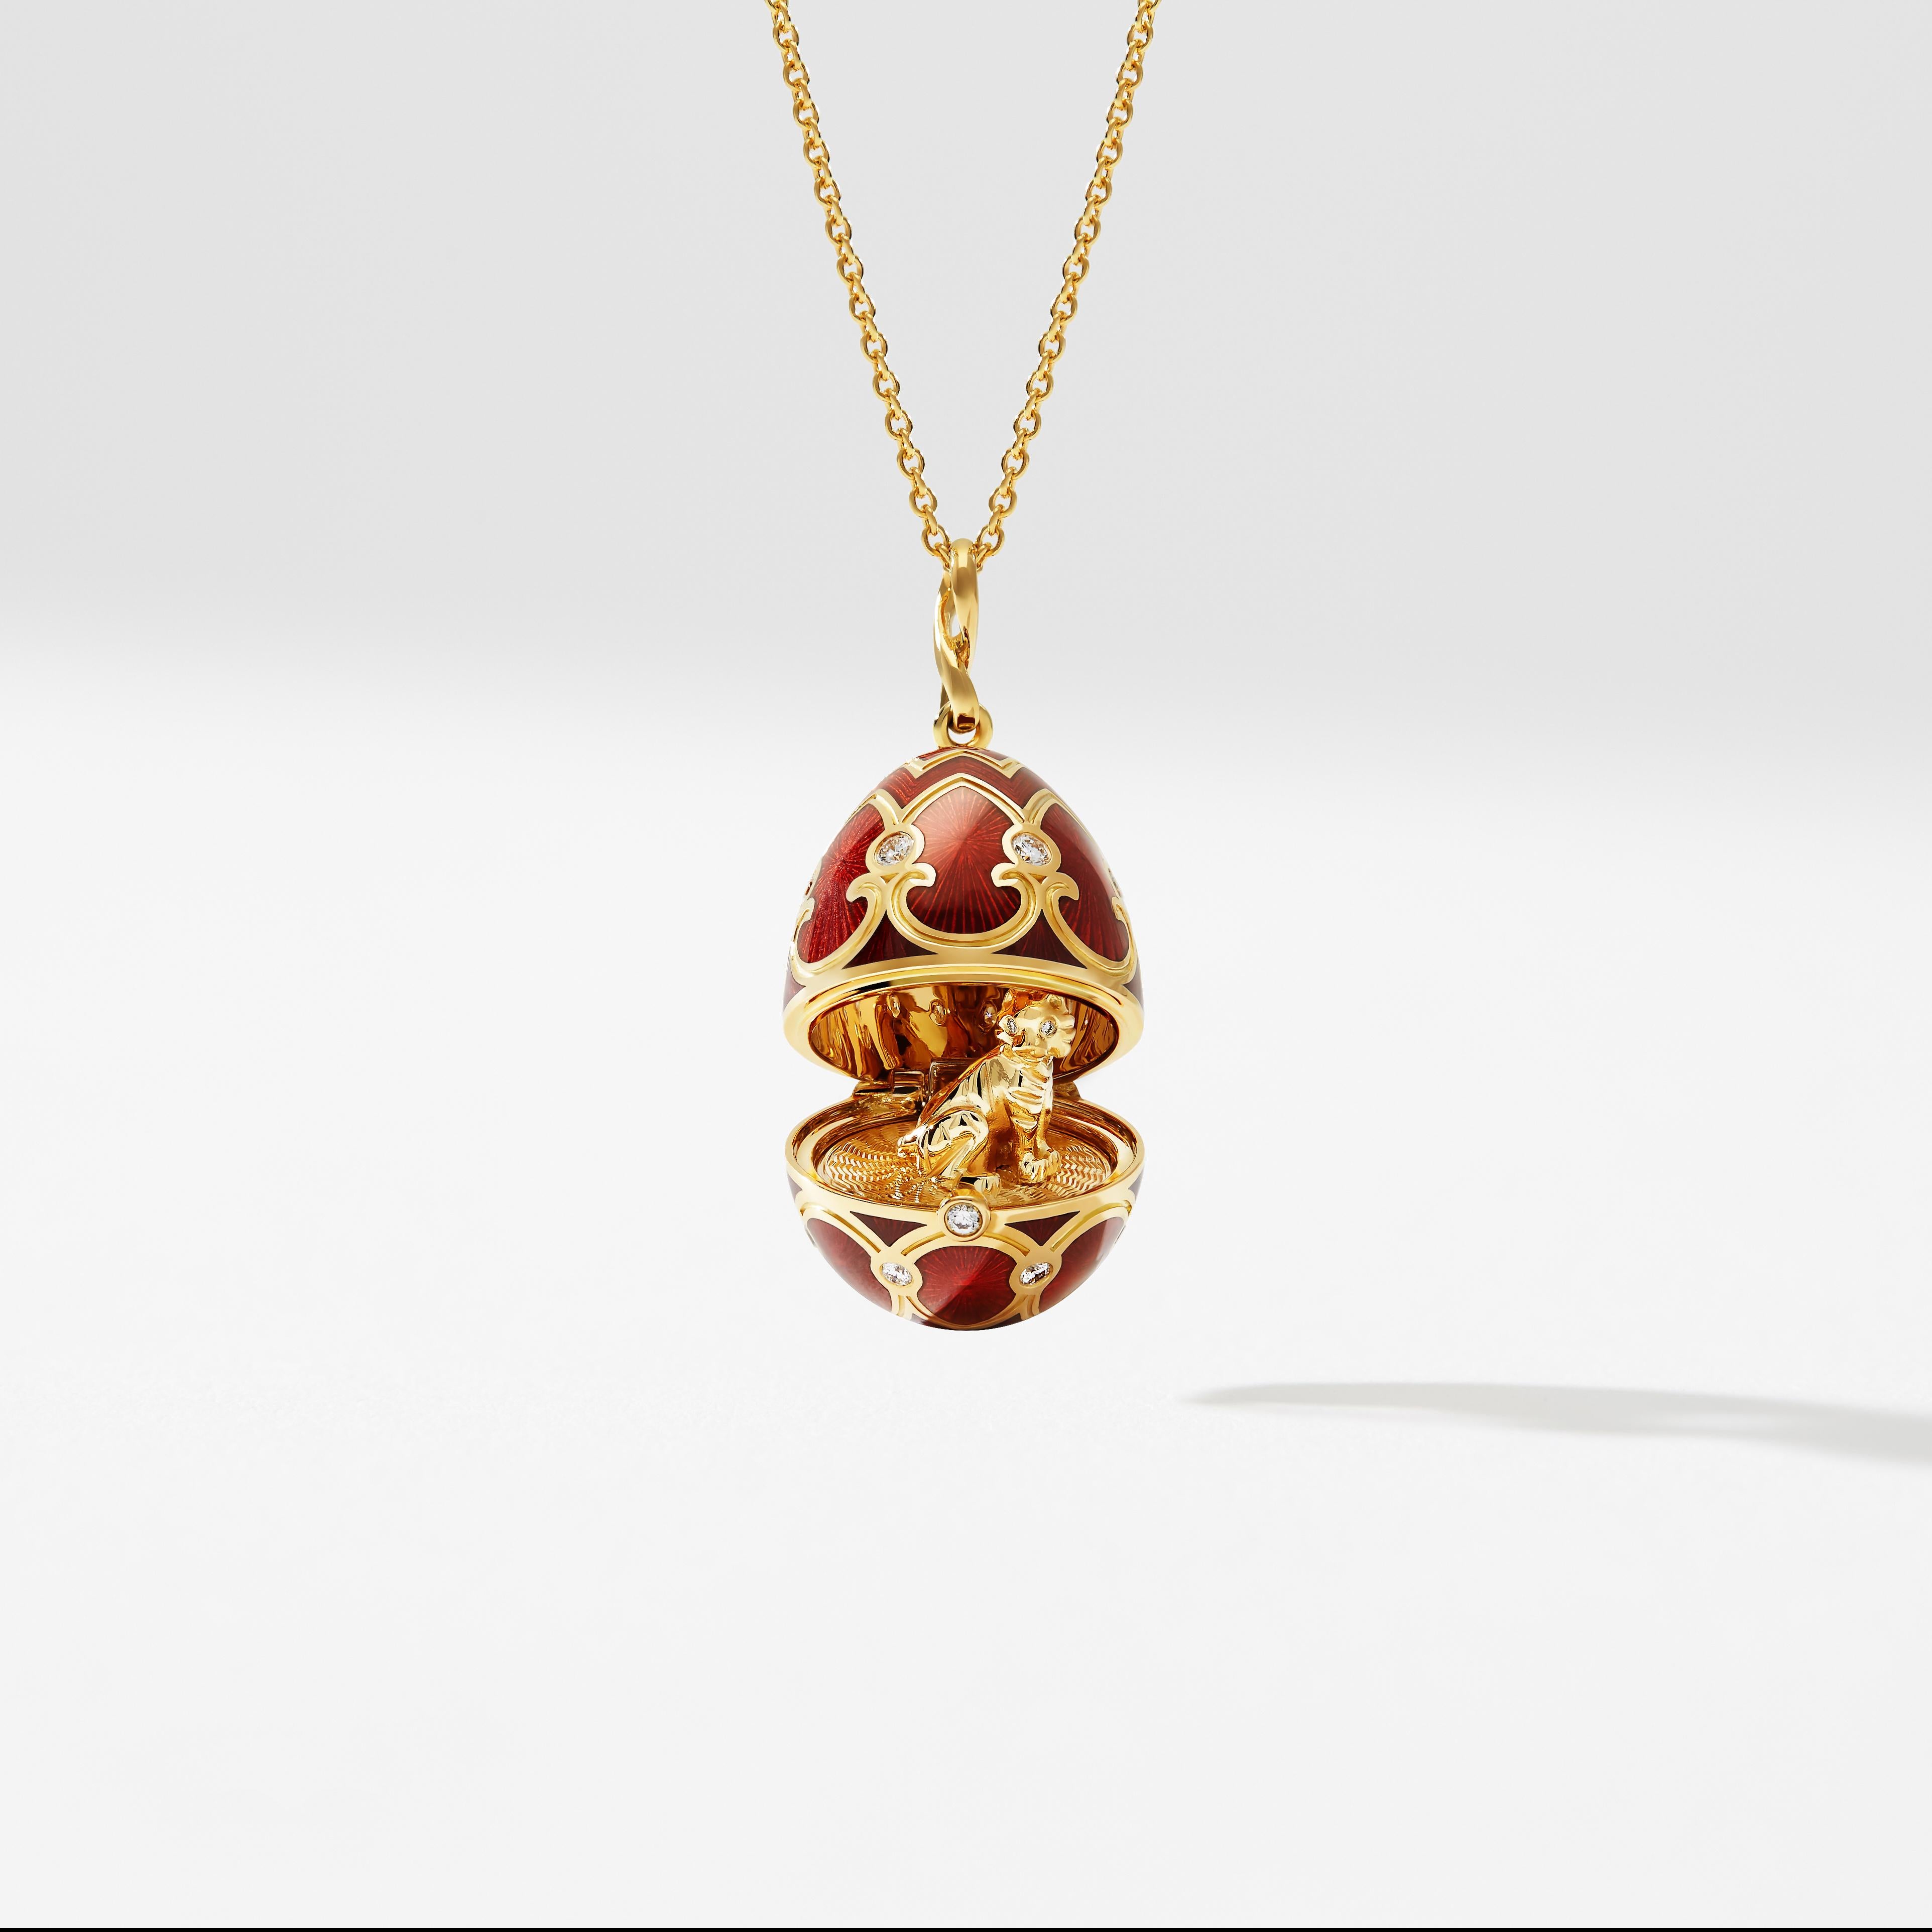 The Heritage Yellow Gold Diamond & Red Guilloché Enamel Year Of The Tiger Surprise Locket features red guilloché enamel and round white diamonds, set in 18 karat yellow gold. The locket opens to reveal an 18 karat yellow gold tiger with diamond set